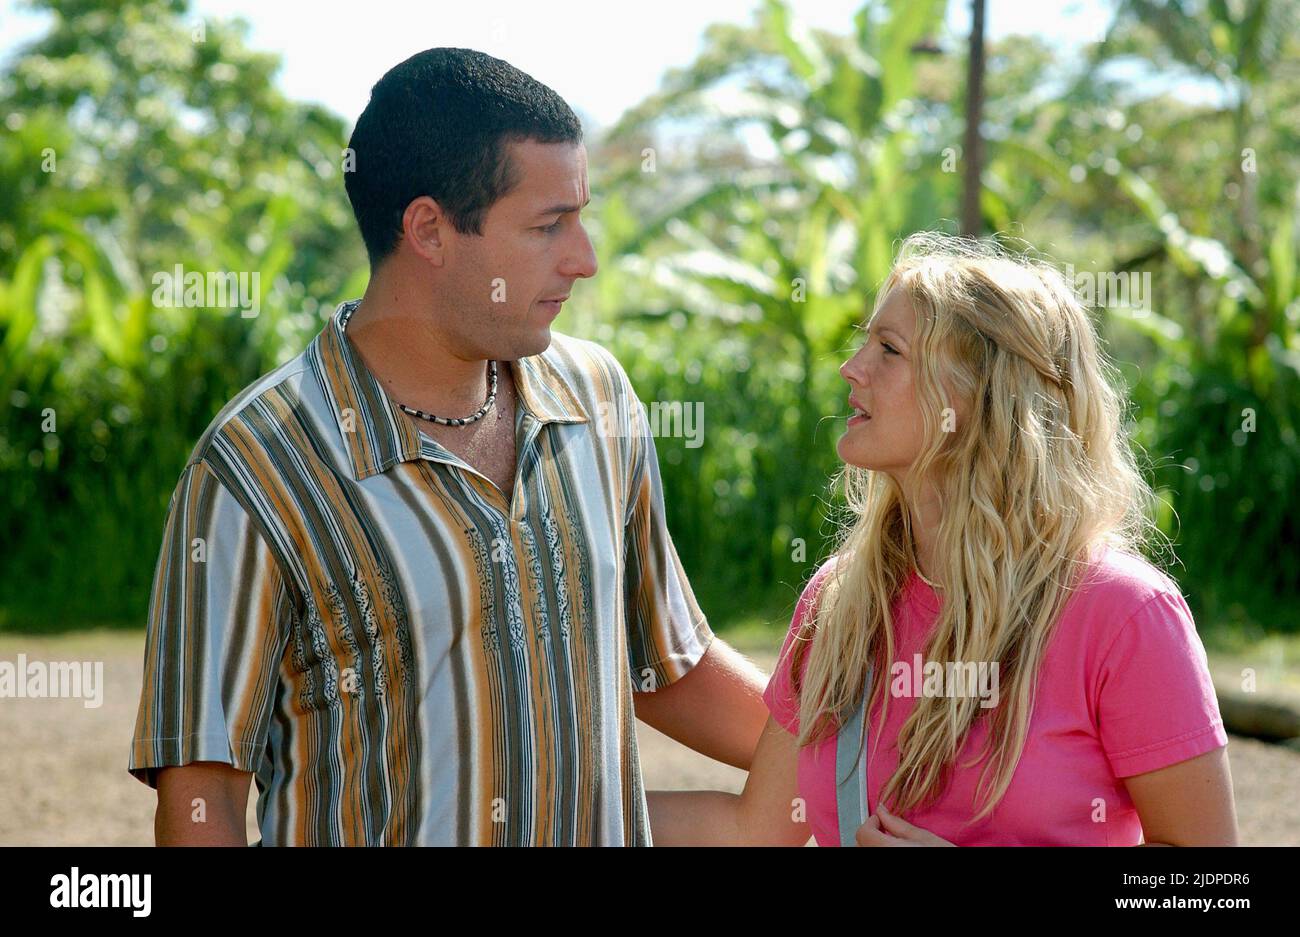 50 First Dates (2004) - Score Suite